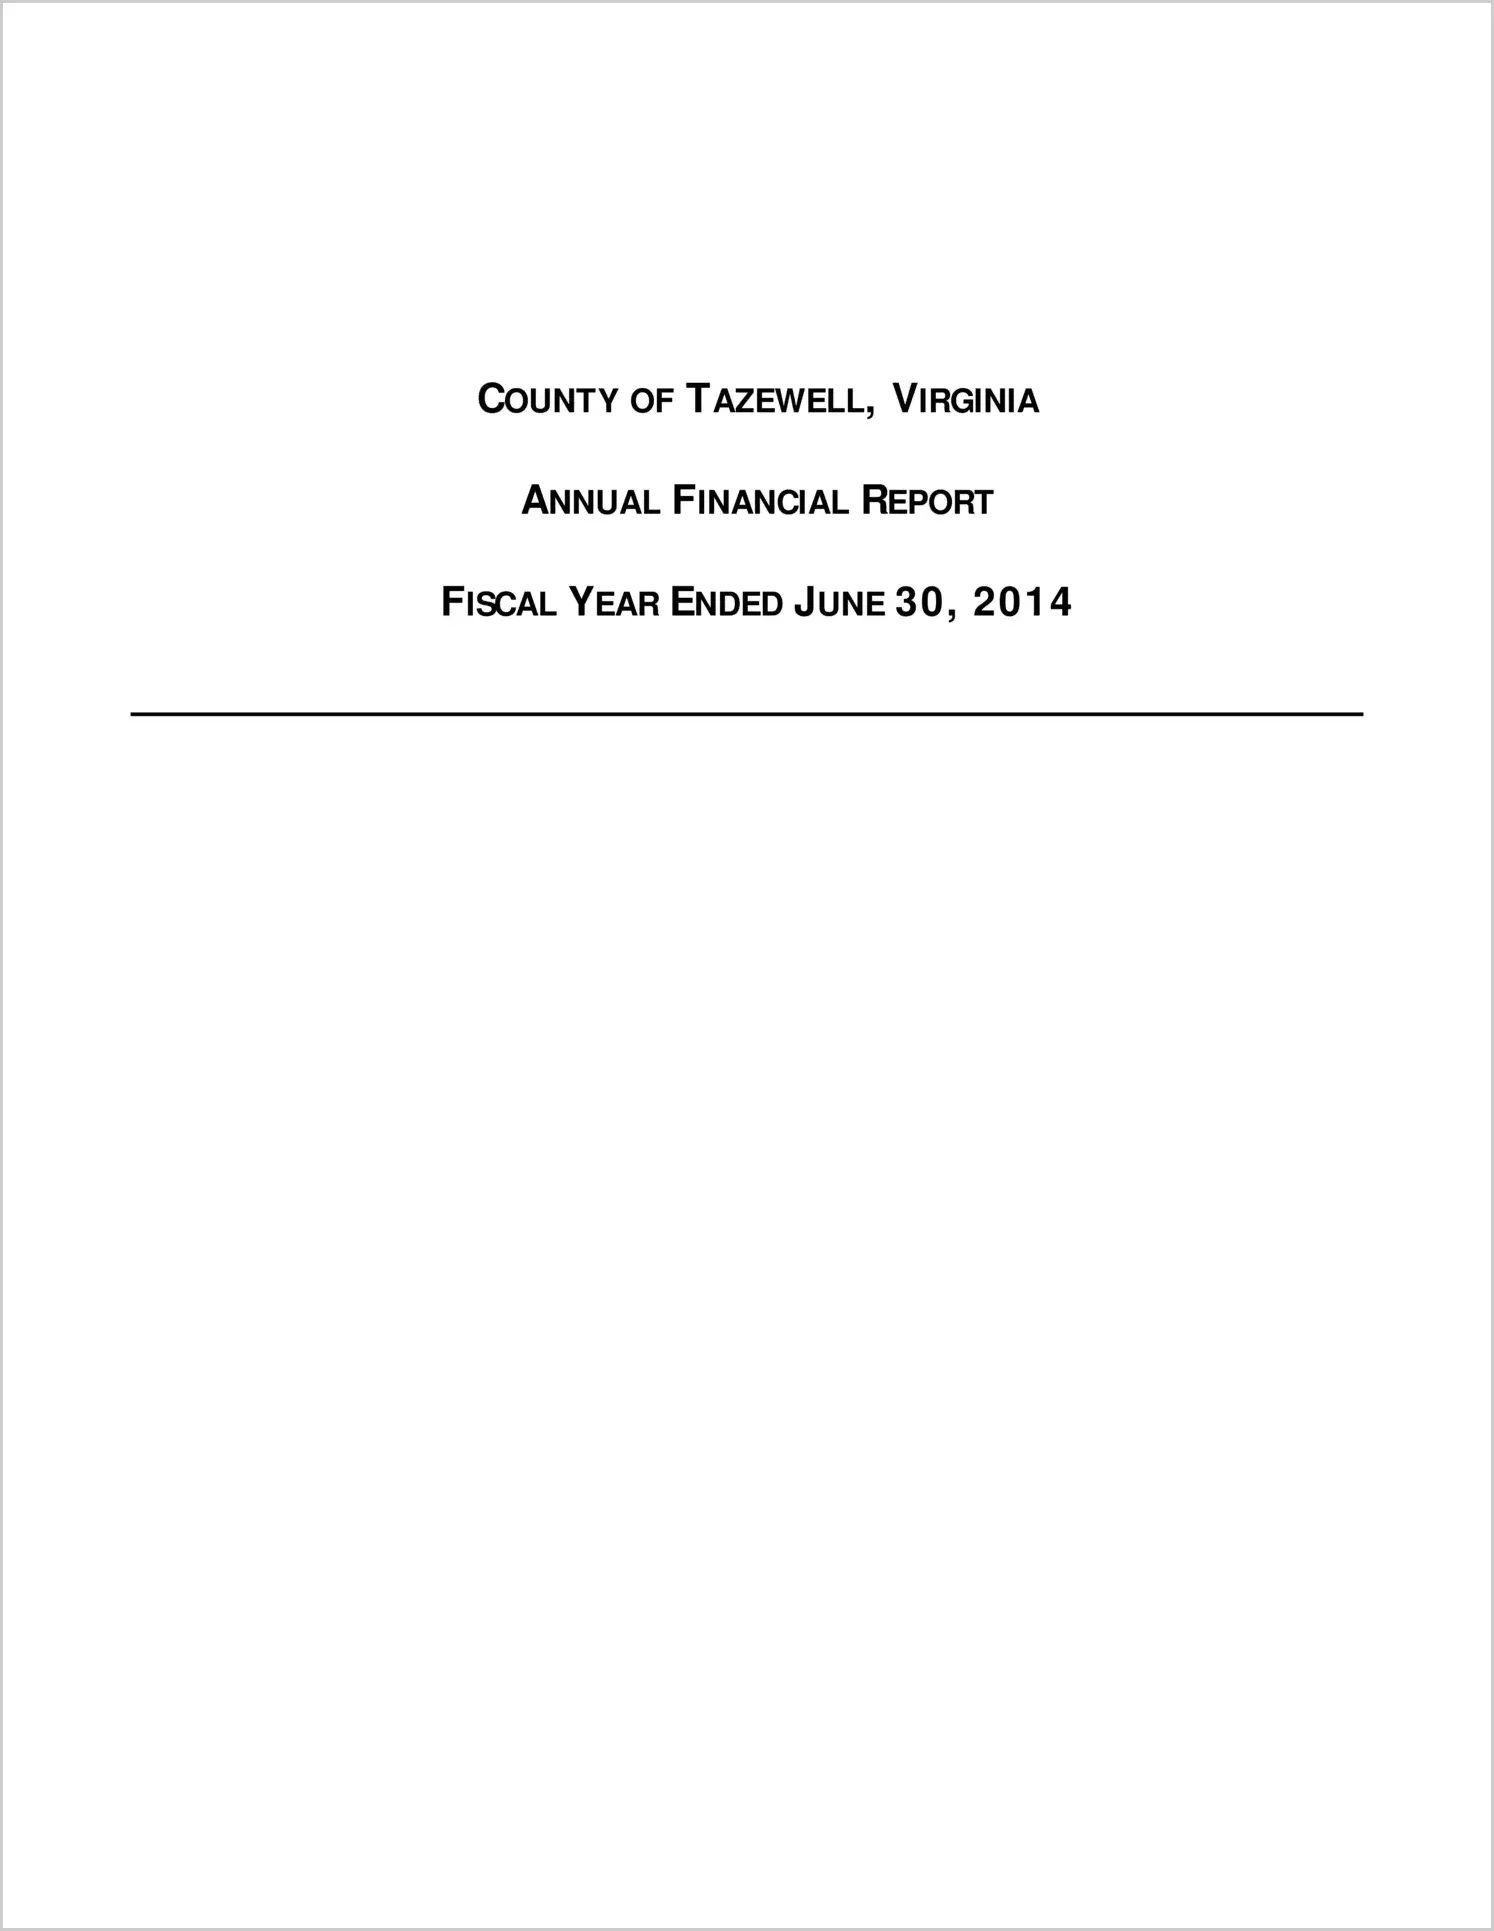 2014 Annual Financial Report for County of Tazewell